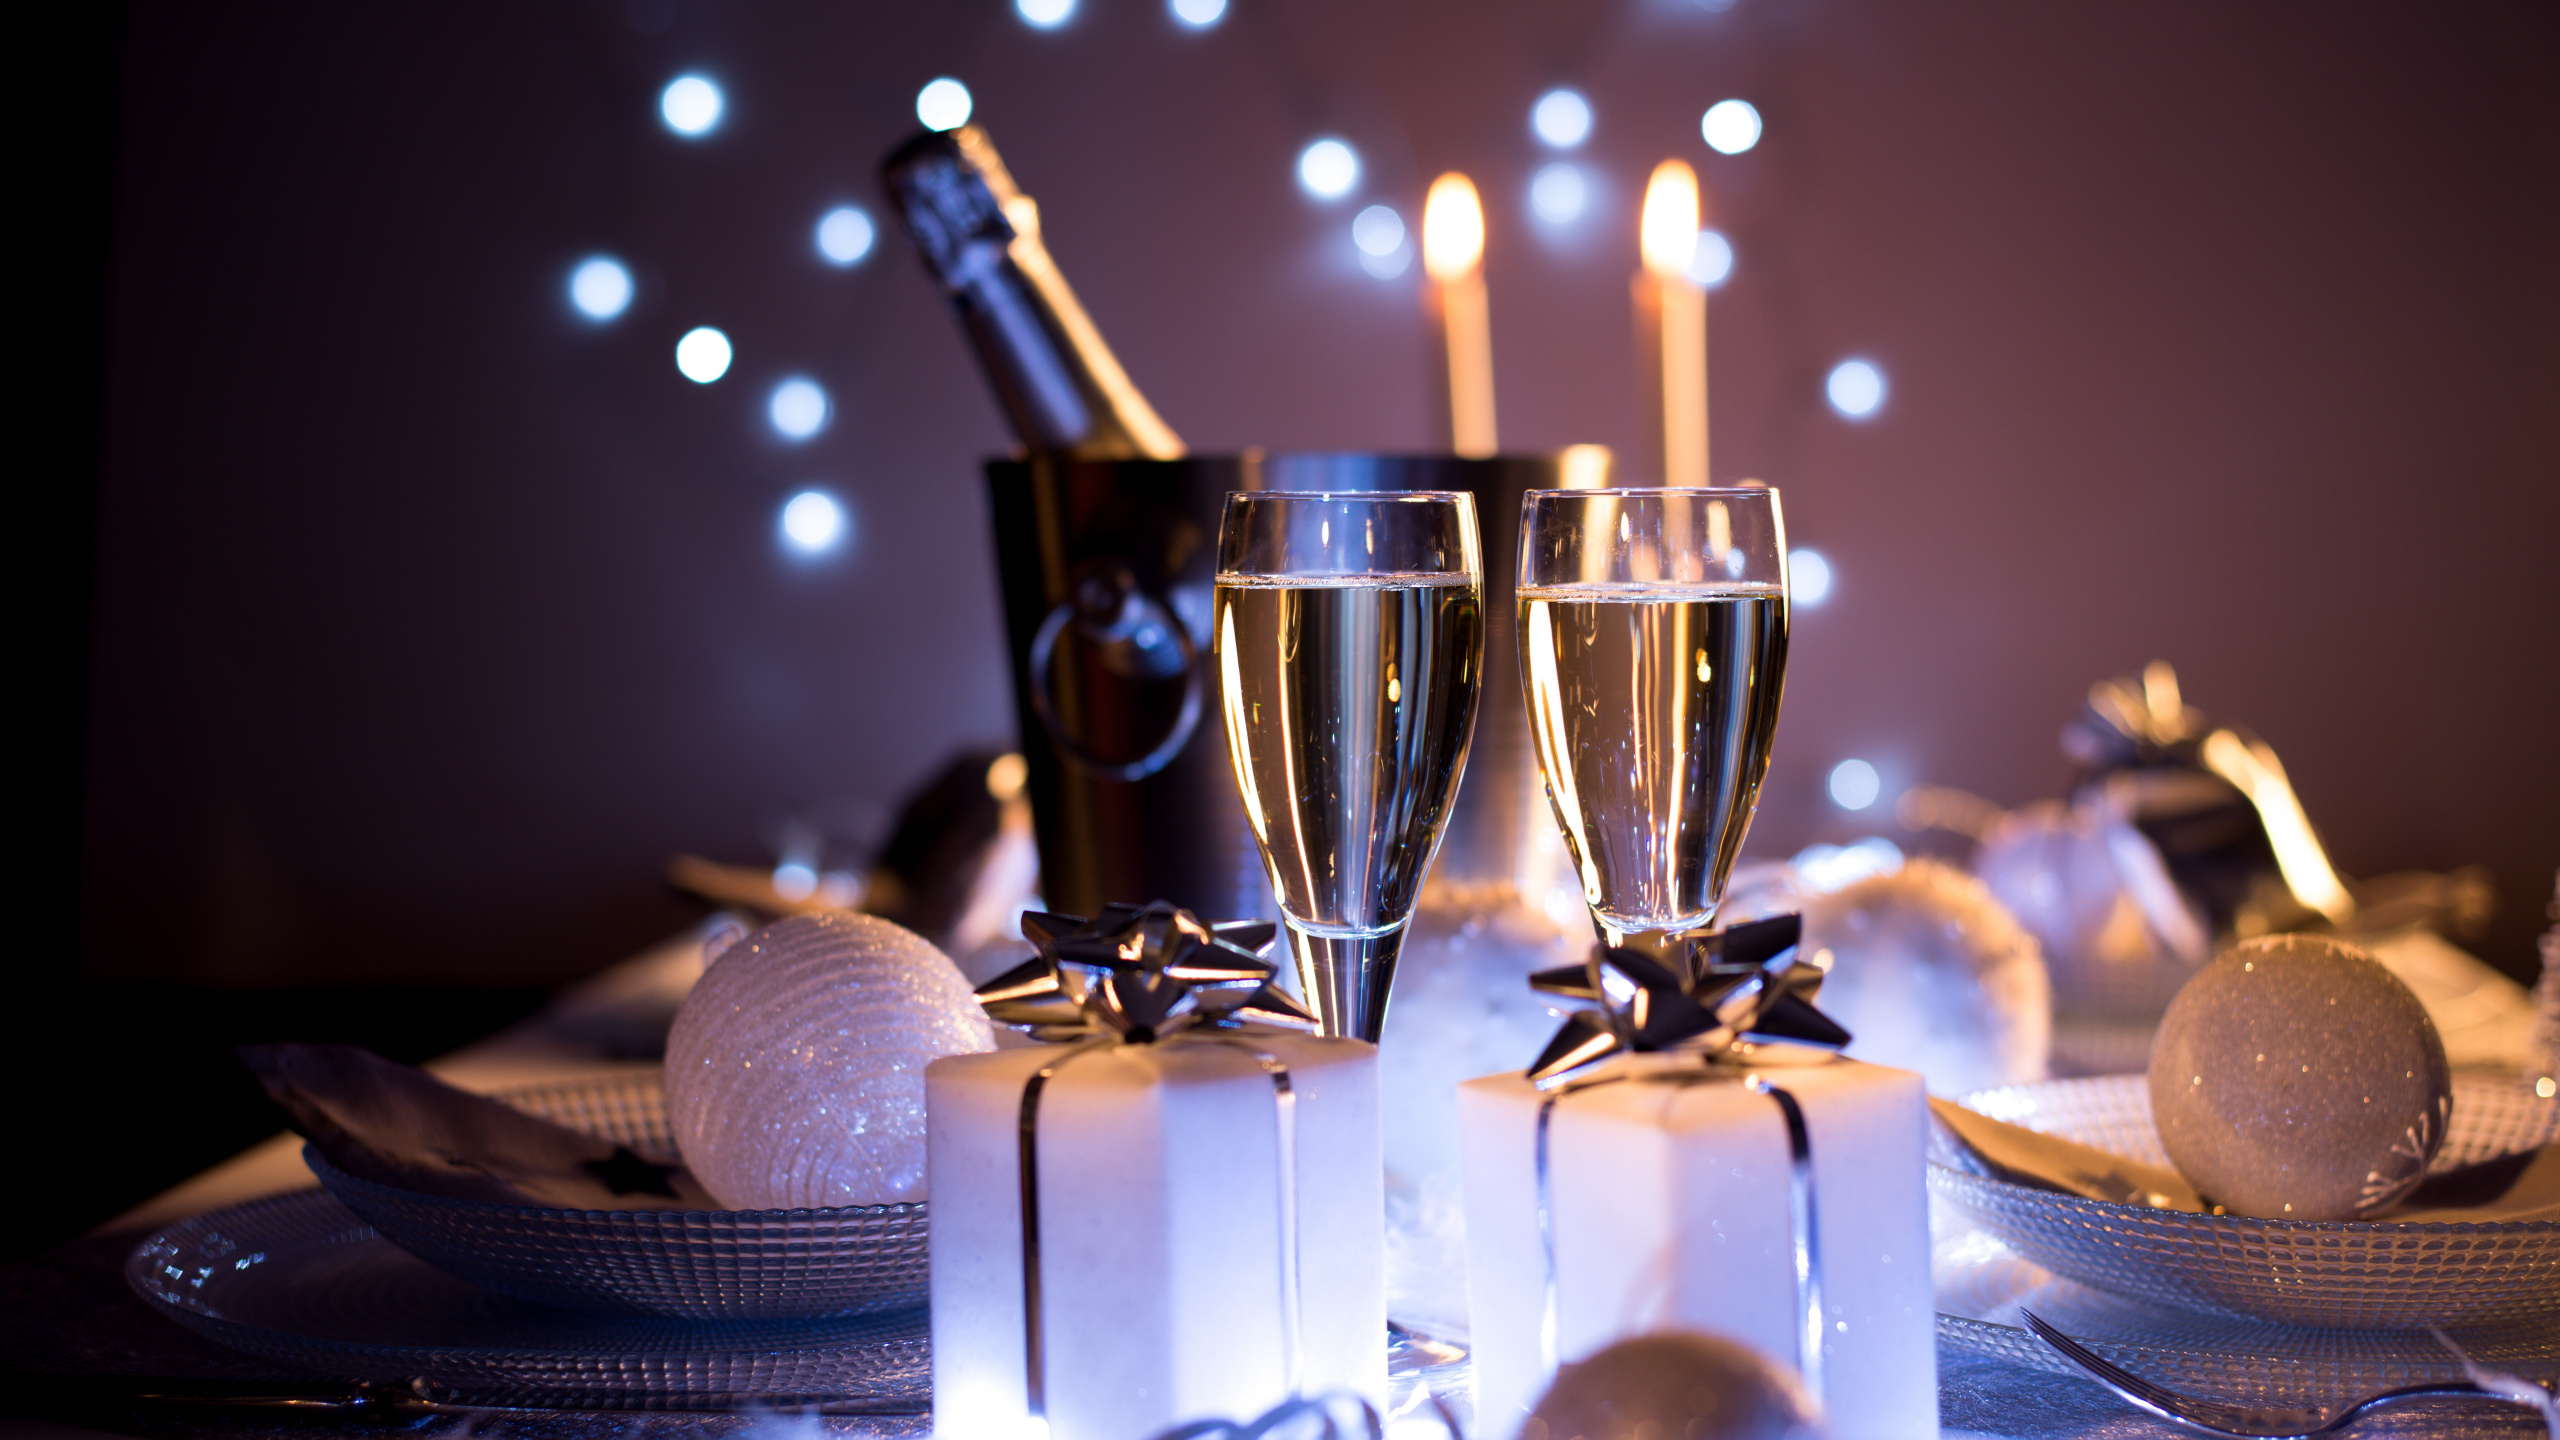 Champagne, Wine, New Years Eve, New Year, Still Life. Wallpaper in 2560x1440 Resolution